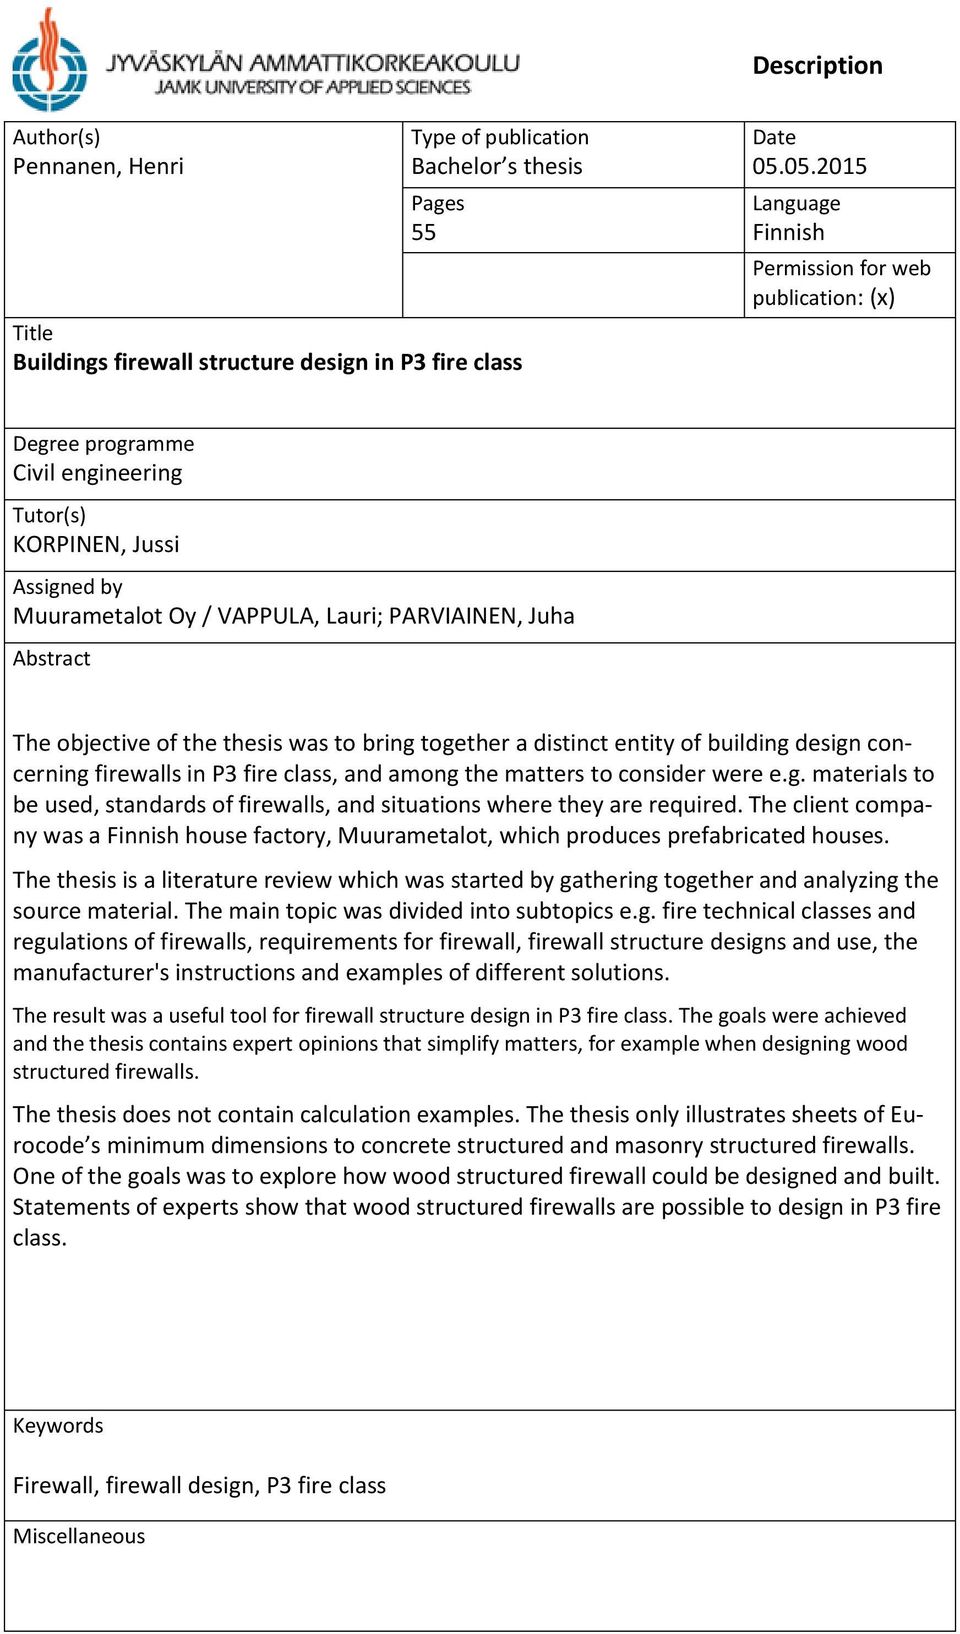 objective of the thesis was to bring together a distinct entity of building design concerning firewalls in P3 fire class, and among the matters to consider were e.g. materials to be used, standards of firewalls, and situations where they are required.